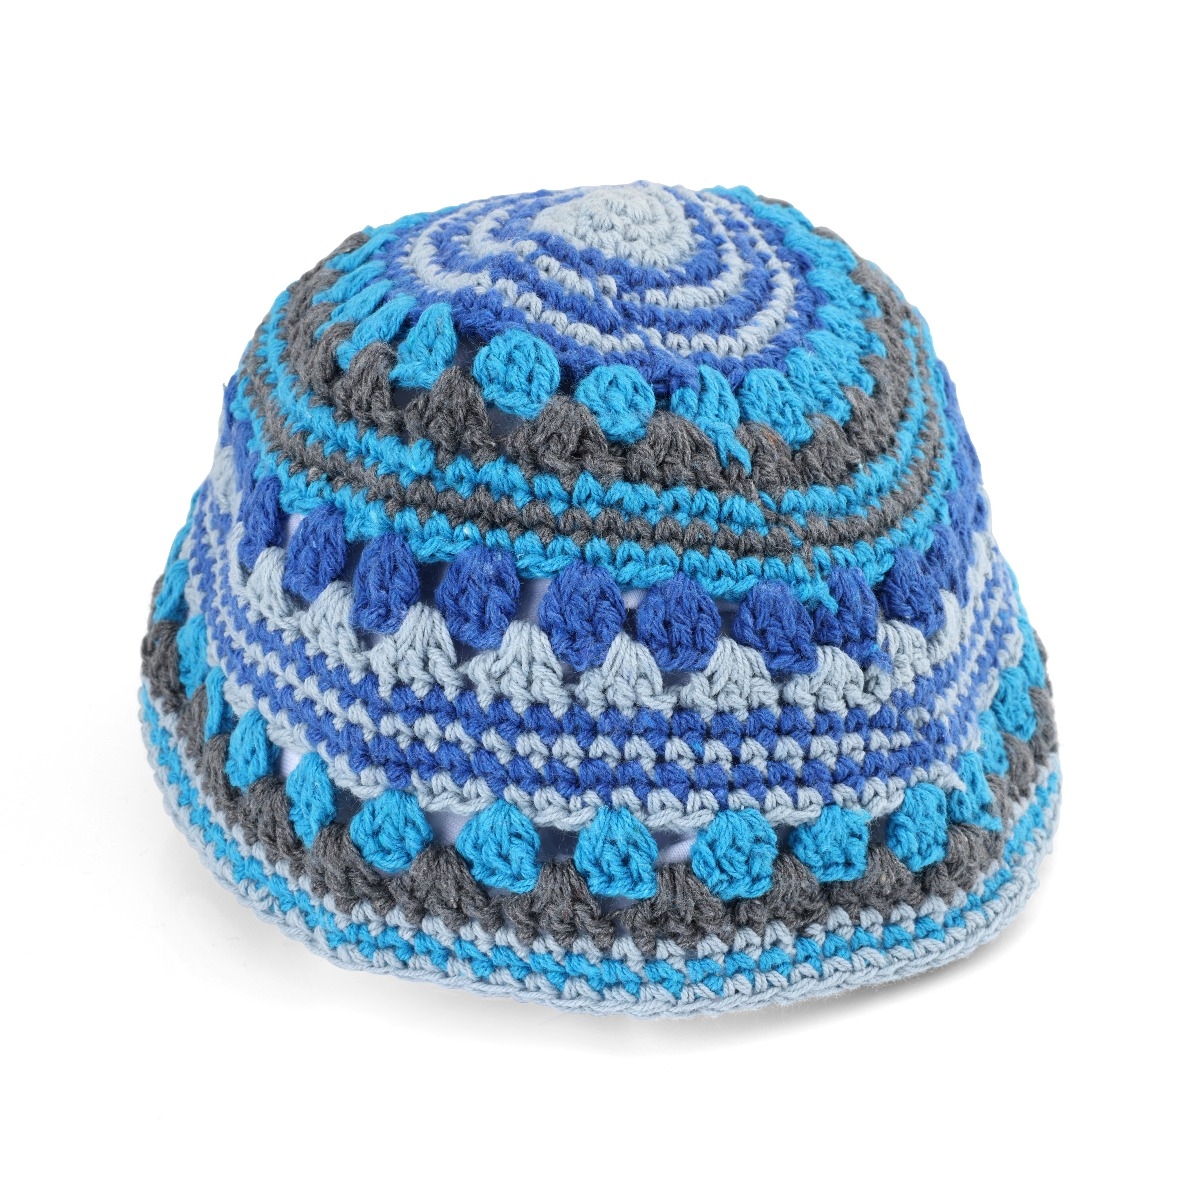 Crocheted Frik Kippah with Blue, Turquoise and Gray Design - 1